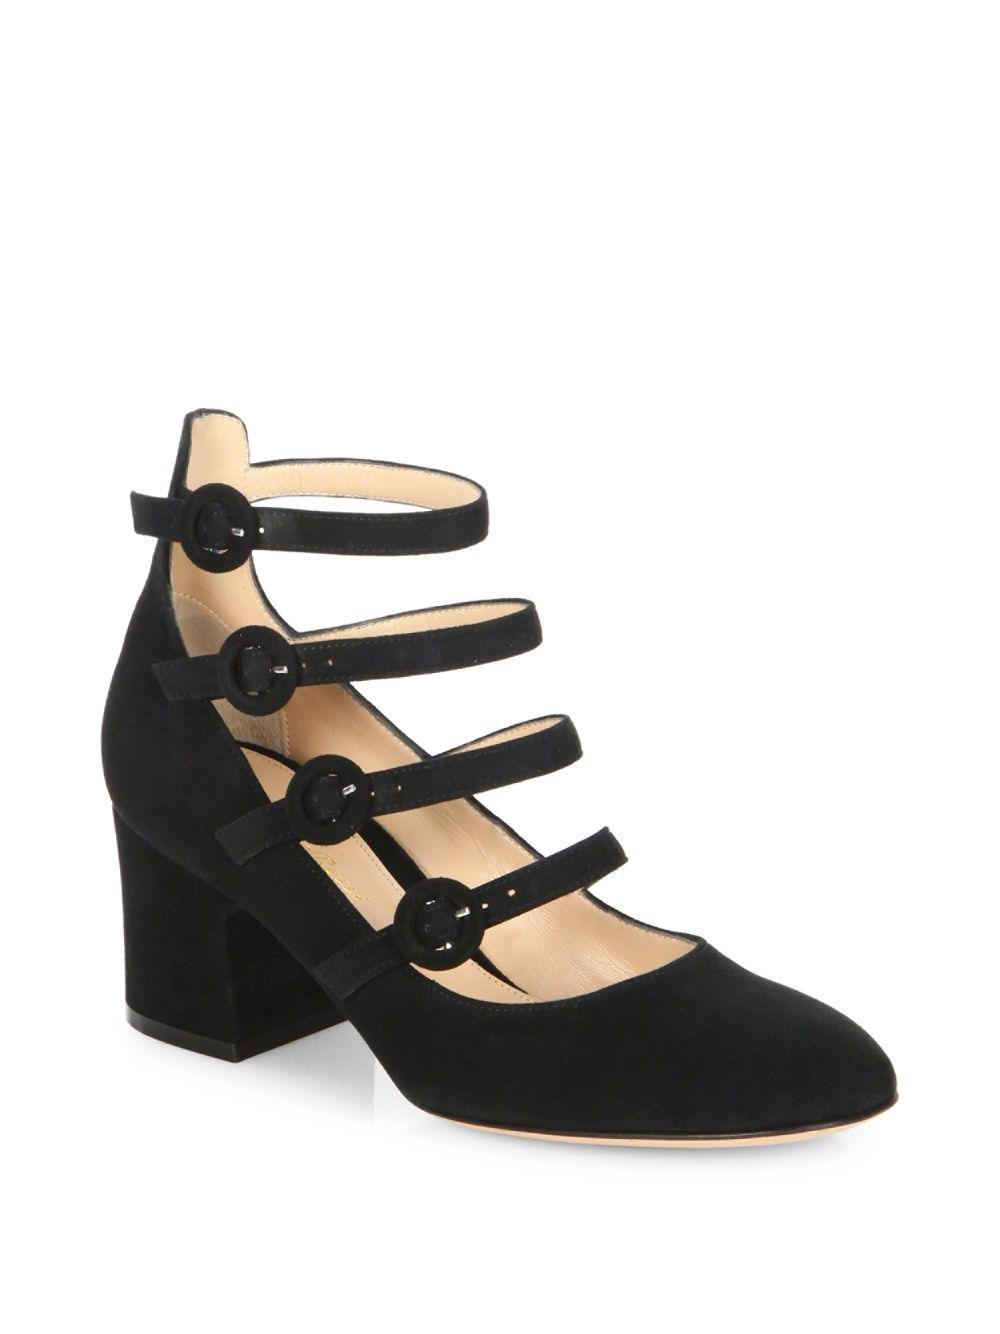 BLOCK HEEL SHOES WITH ANKLE STRAP - Black | ZARA India